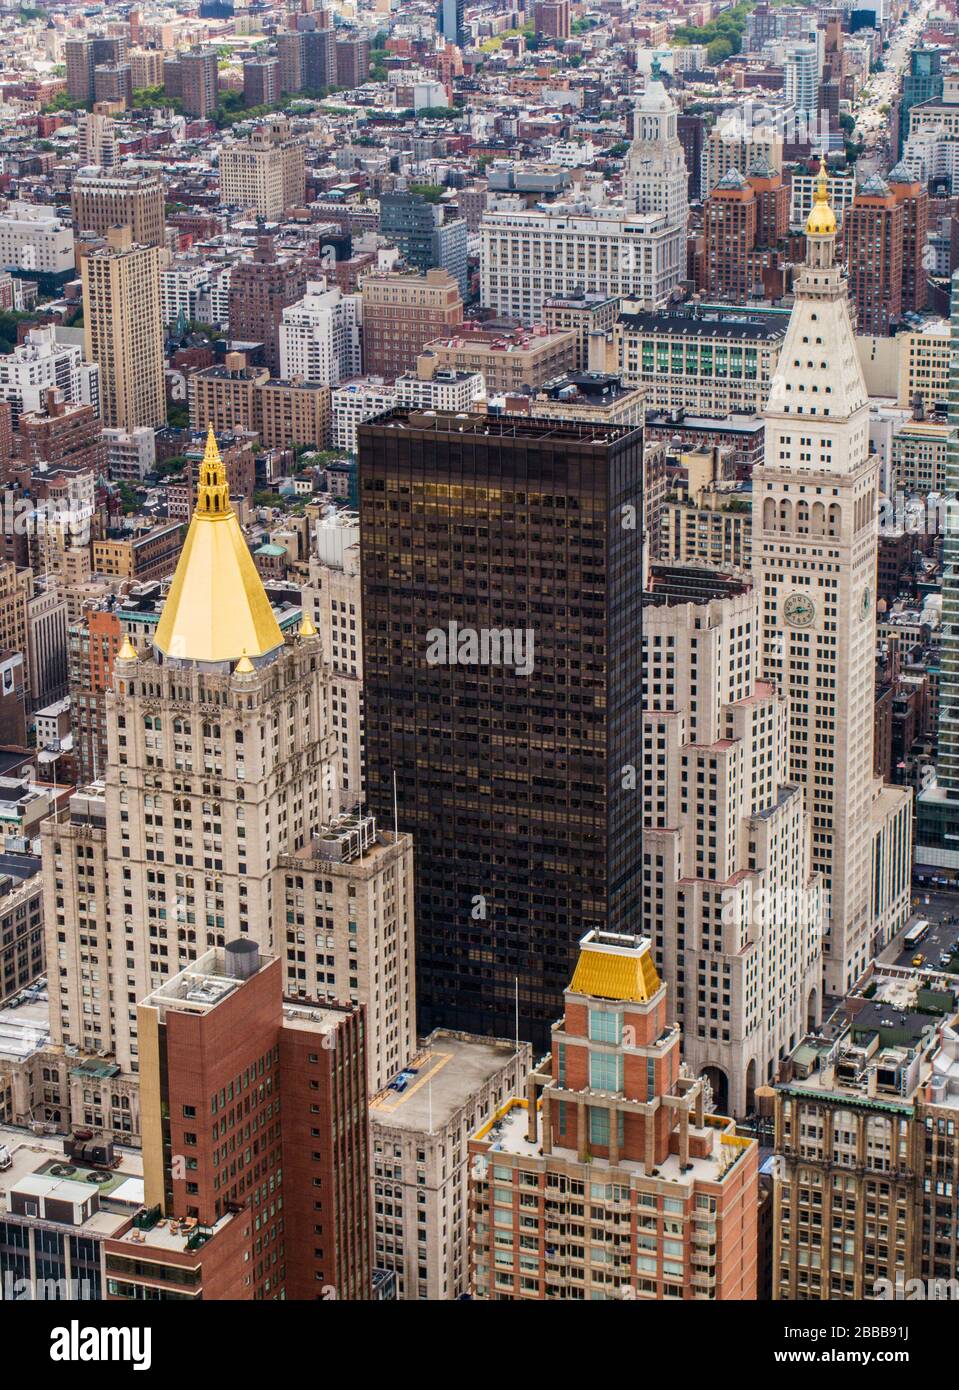 View from the Empire State Building of The New York Life Insurance Pyramid (left) and the Metropolitan Life Ins. building (right), New York, NY USA Stock Photo